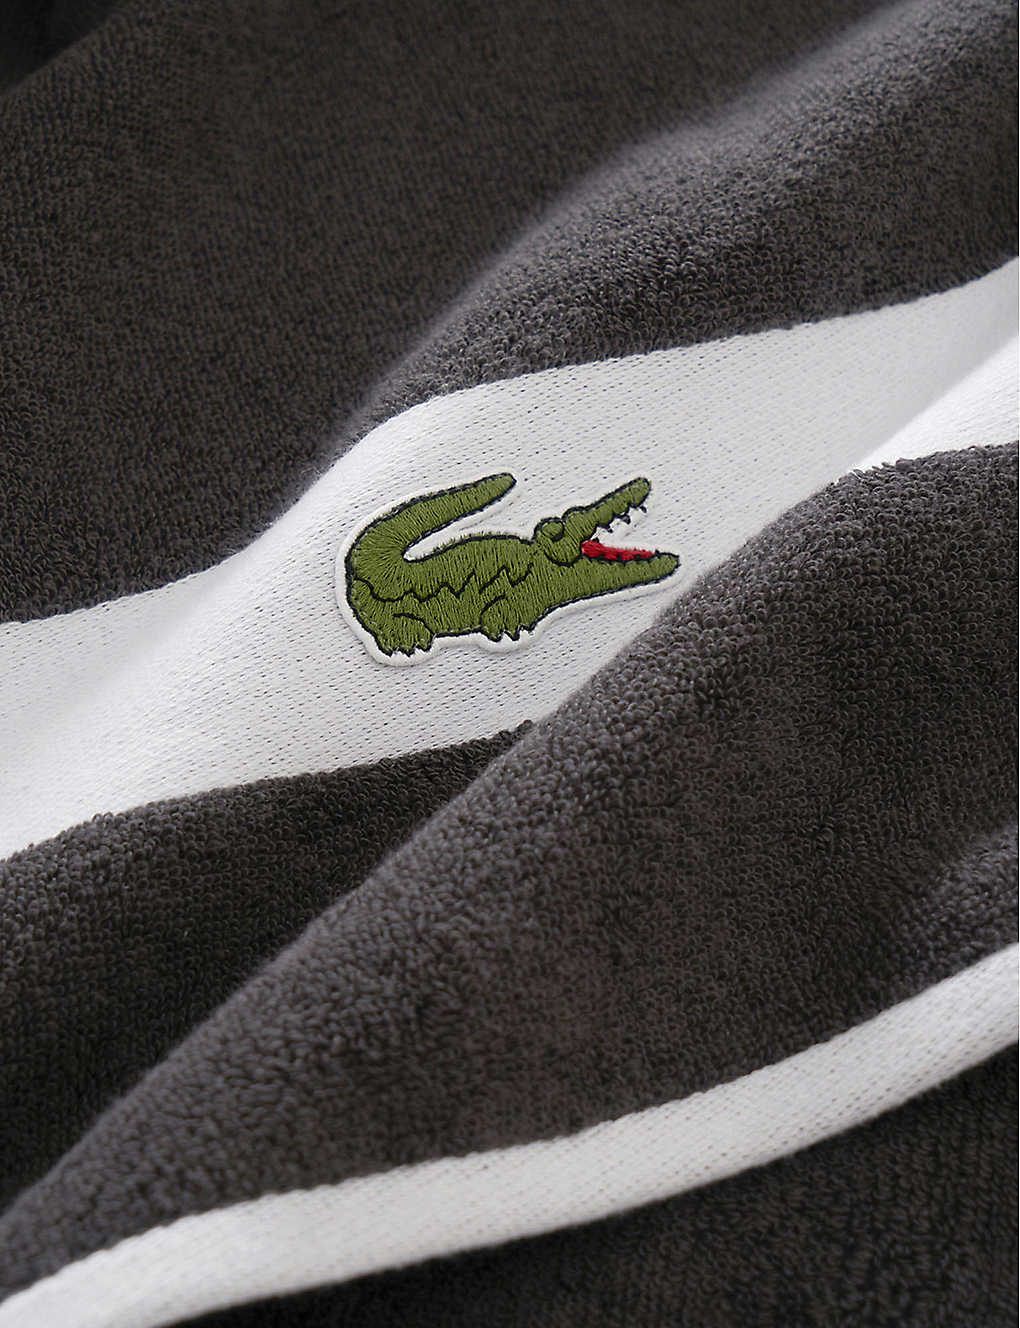 Lacoste Jersey Knitted Fabric  50 x 150 cm 